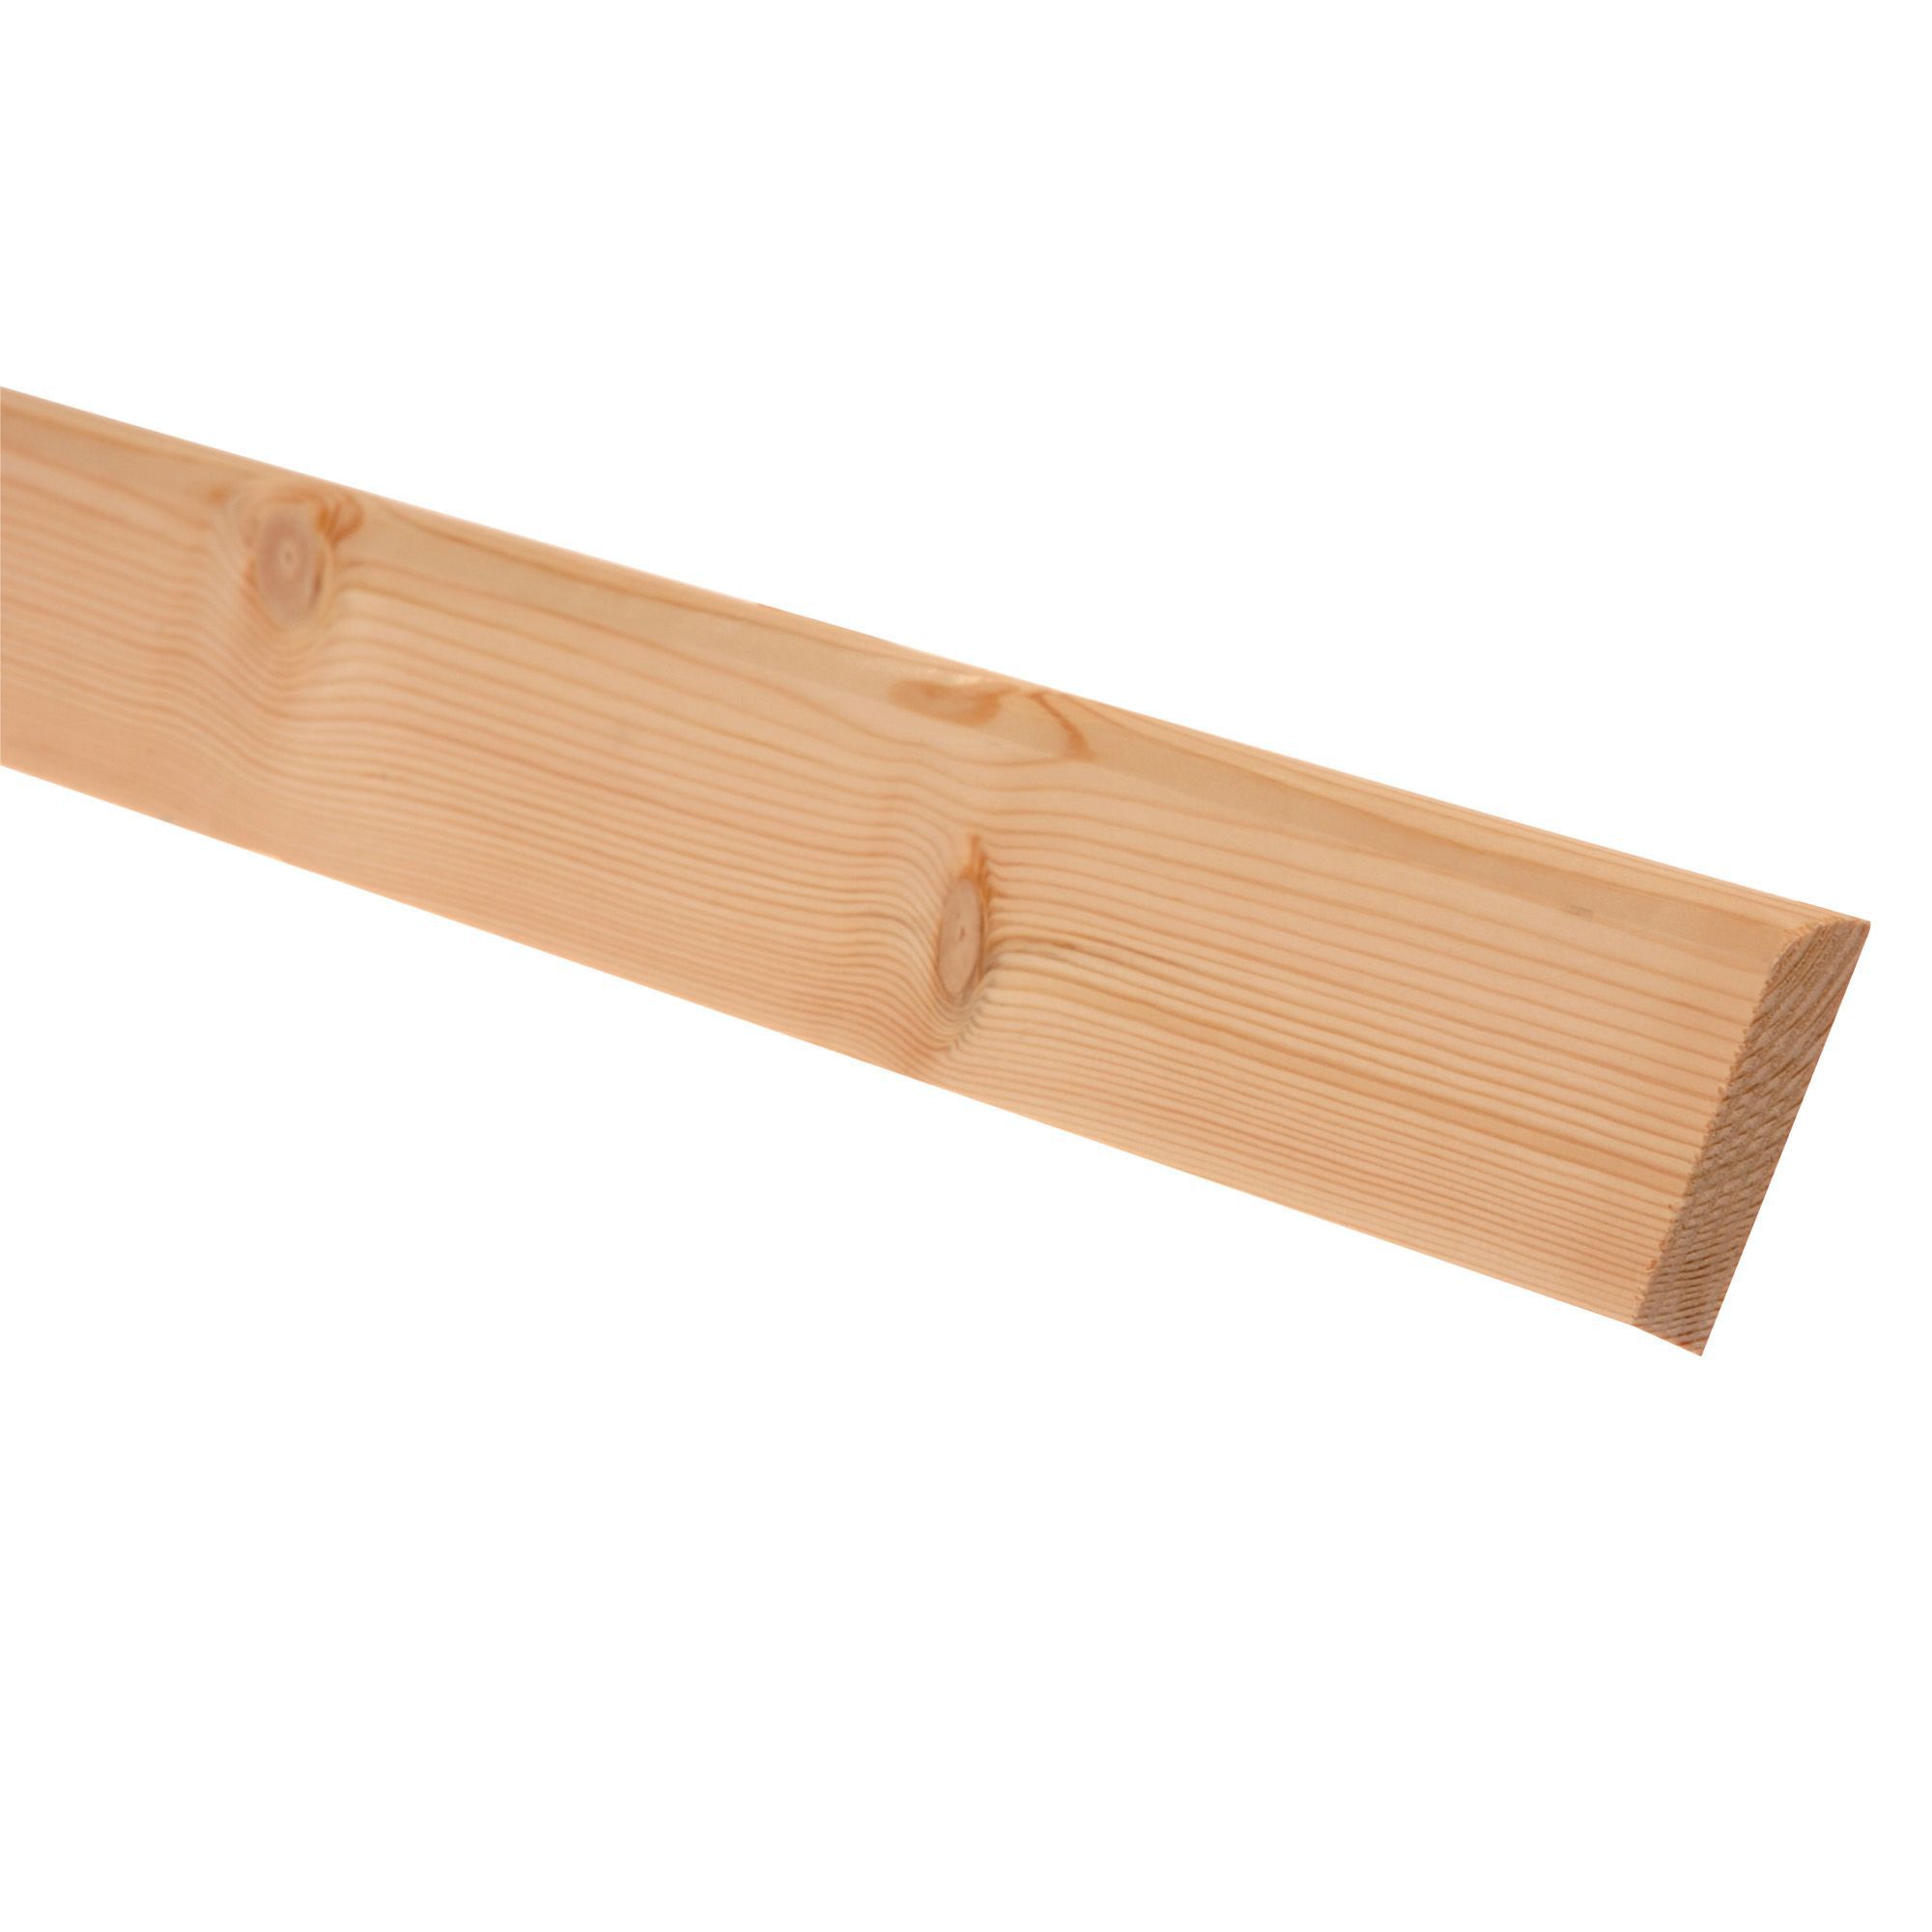 Metsä Wood Smooth Pine Bullnose Softwood Skirting board (L)2.4m (W)69mm (T)15mm, Pack of 4